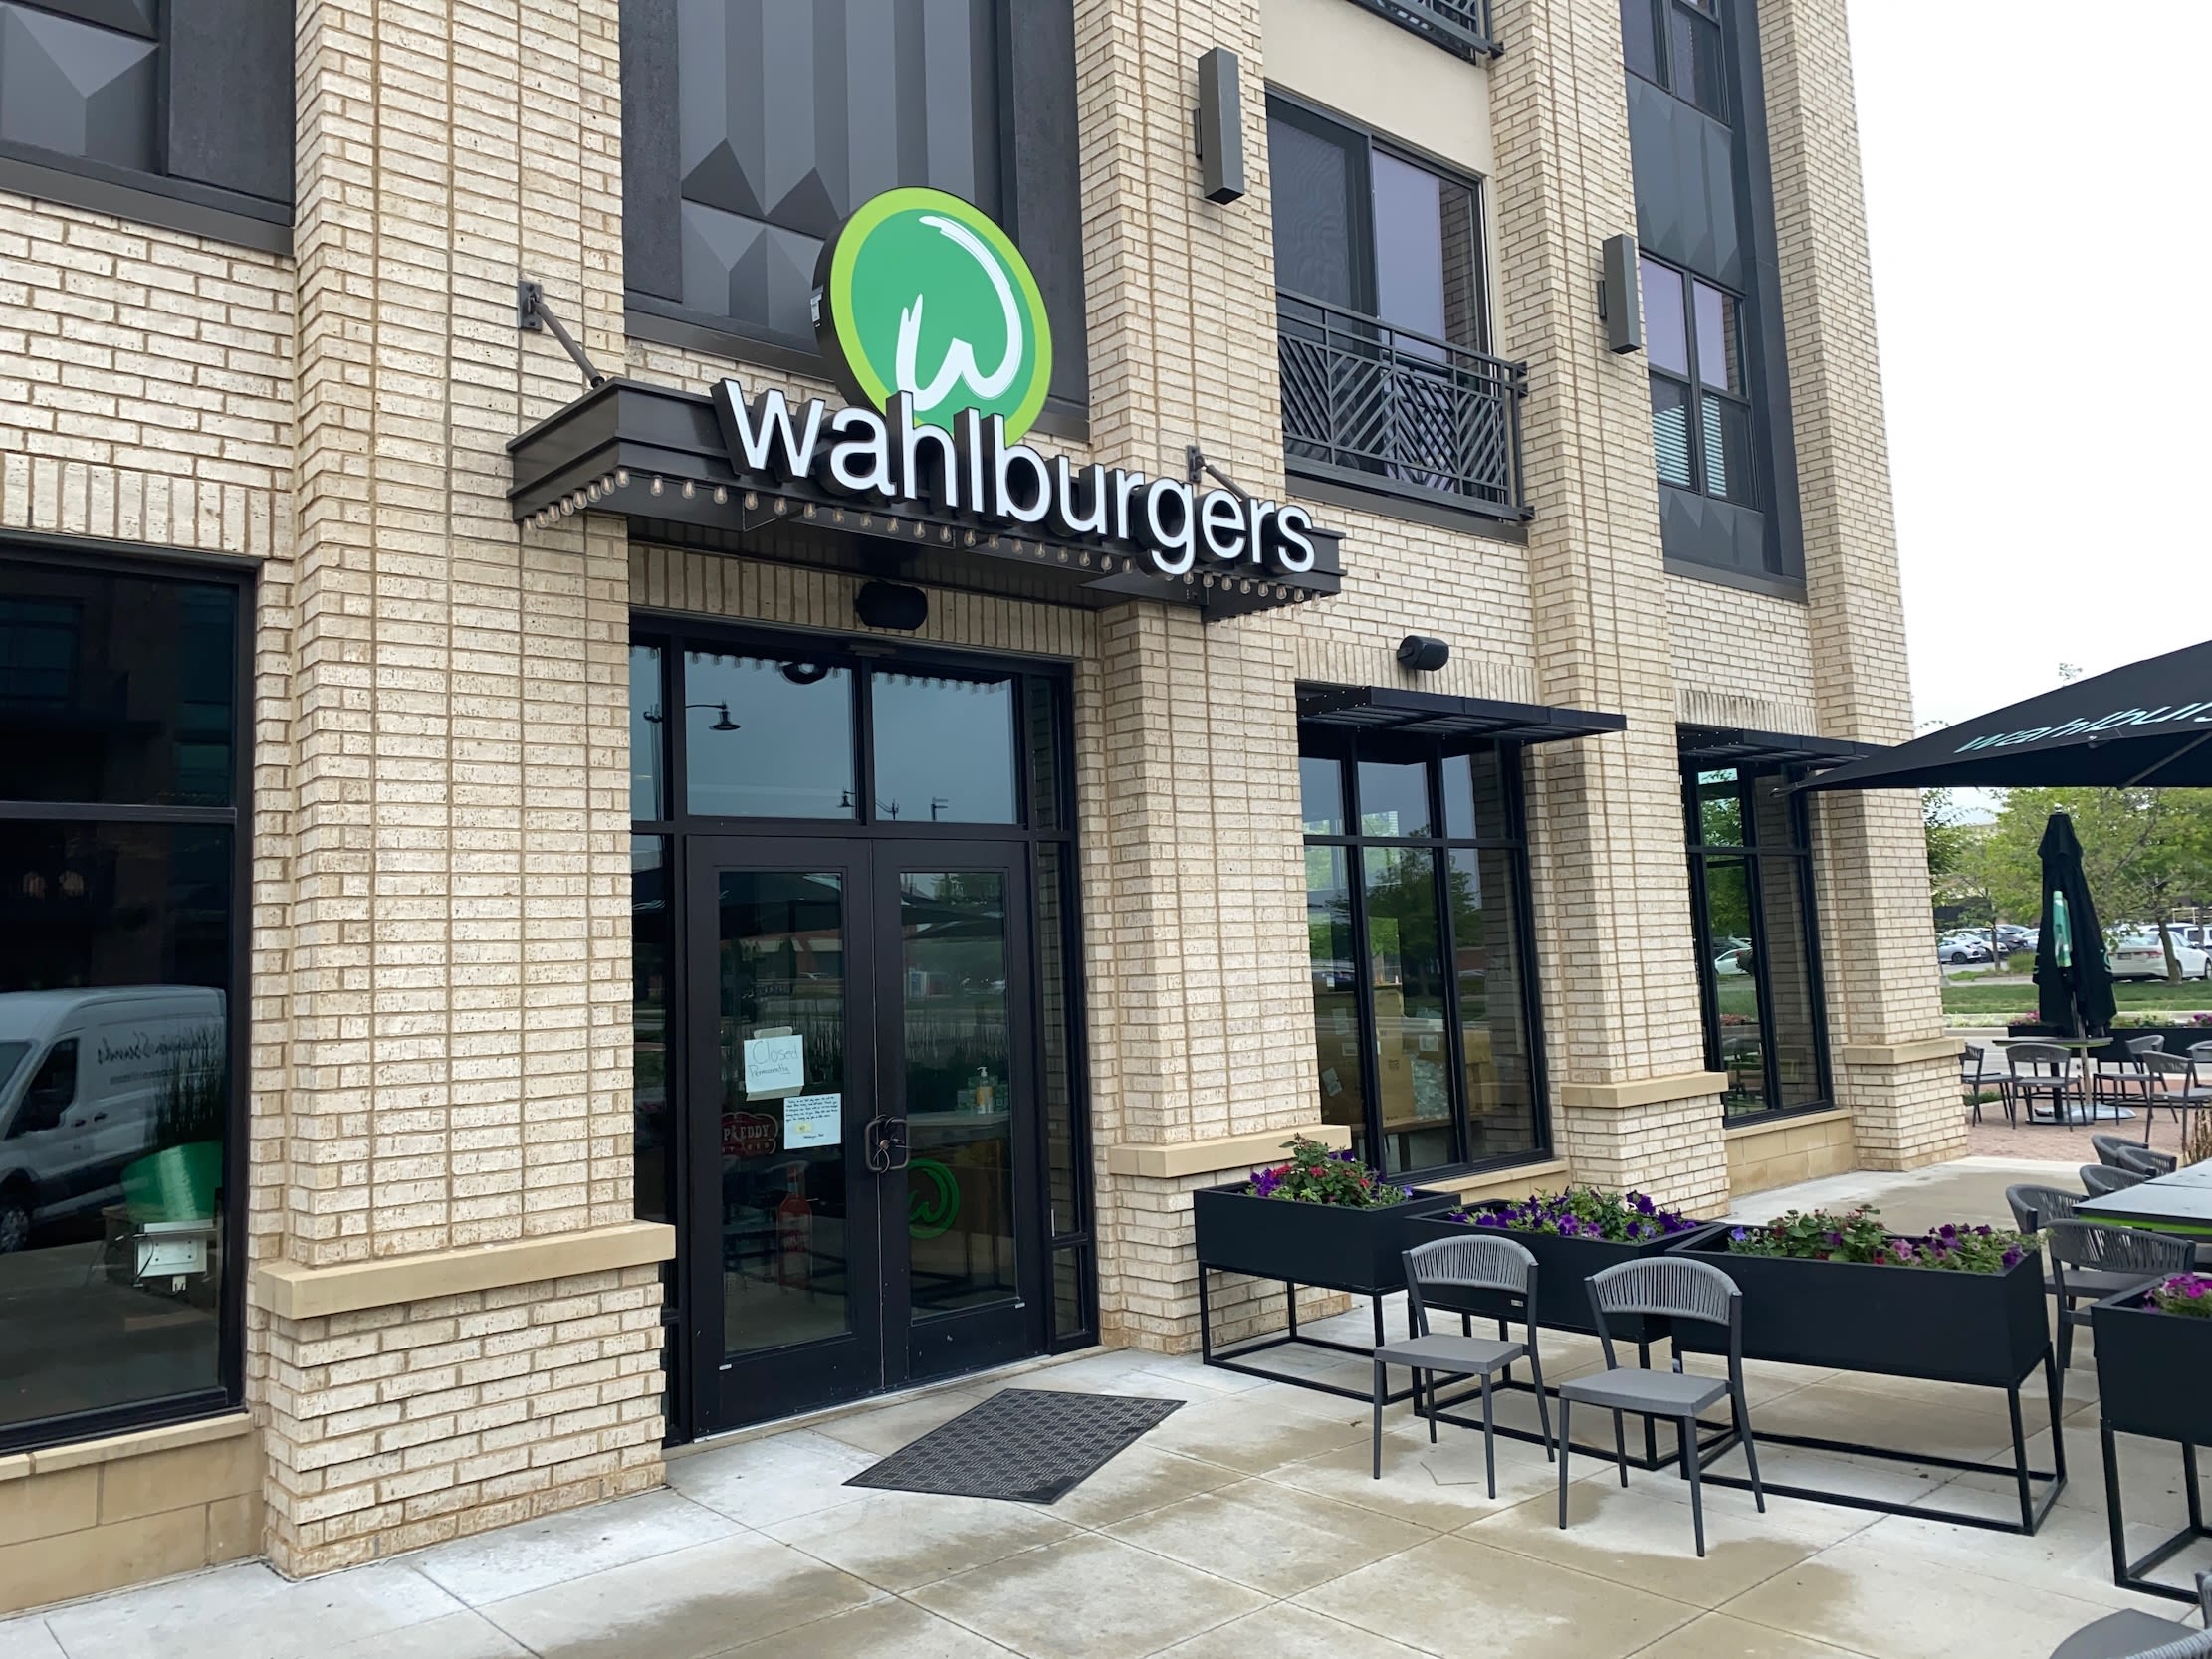 Wahlburgers in Carmel, MOTW Coffee & Pastries in Castleton close - Indianapolis Business Journal